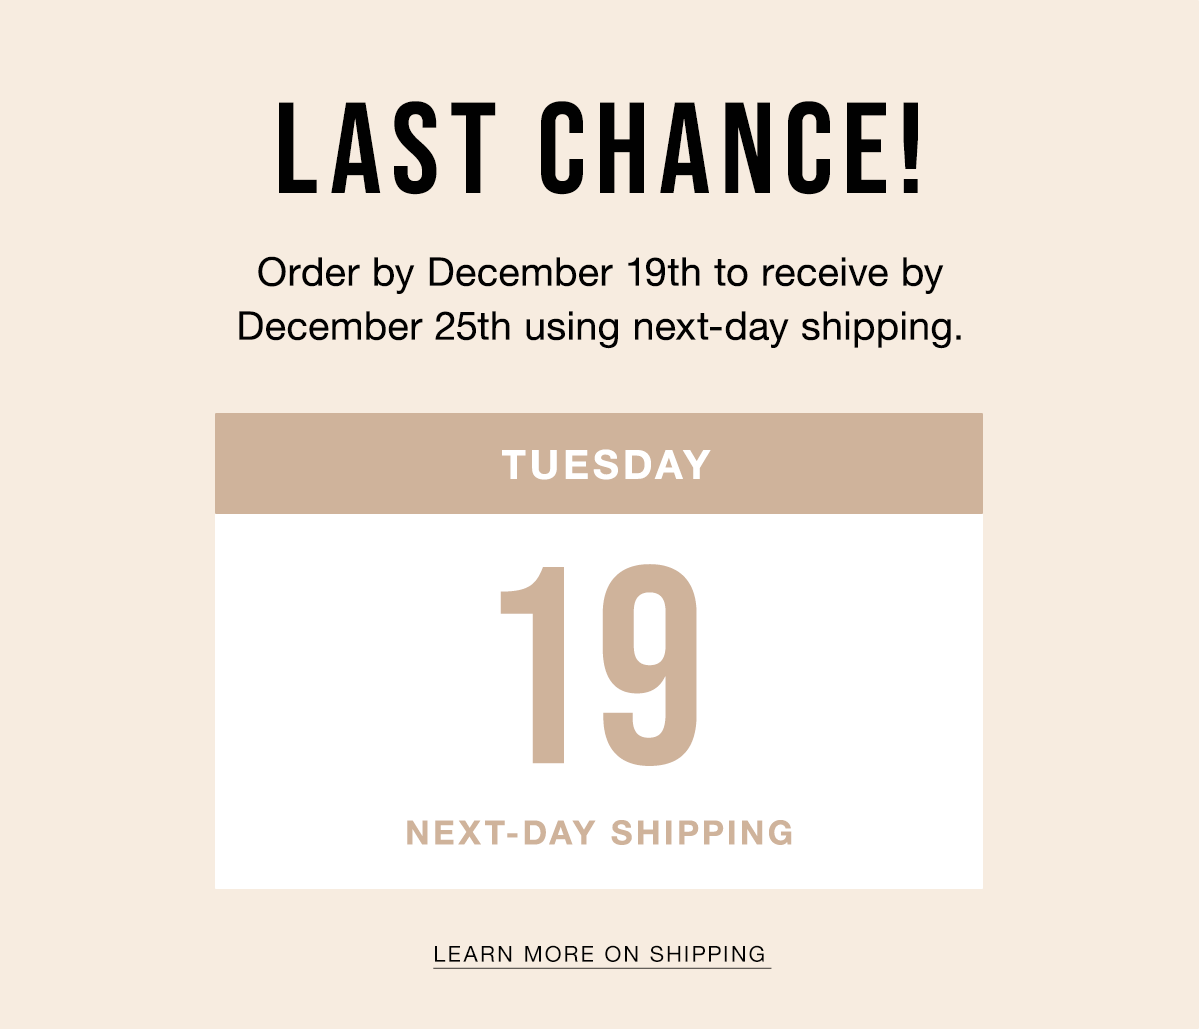 Last chance for your gifts to arrive on time!